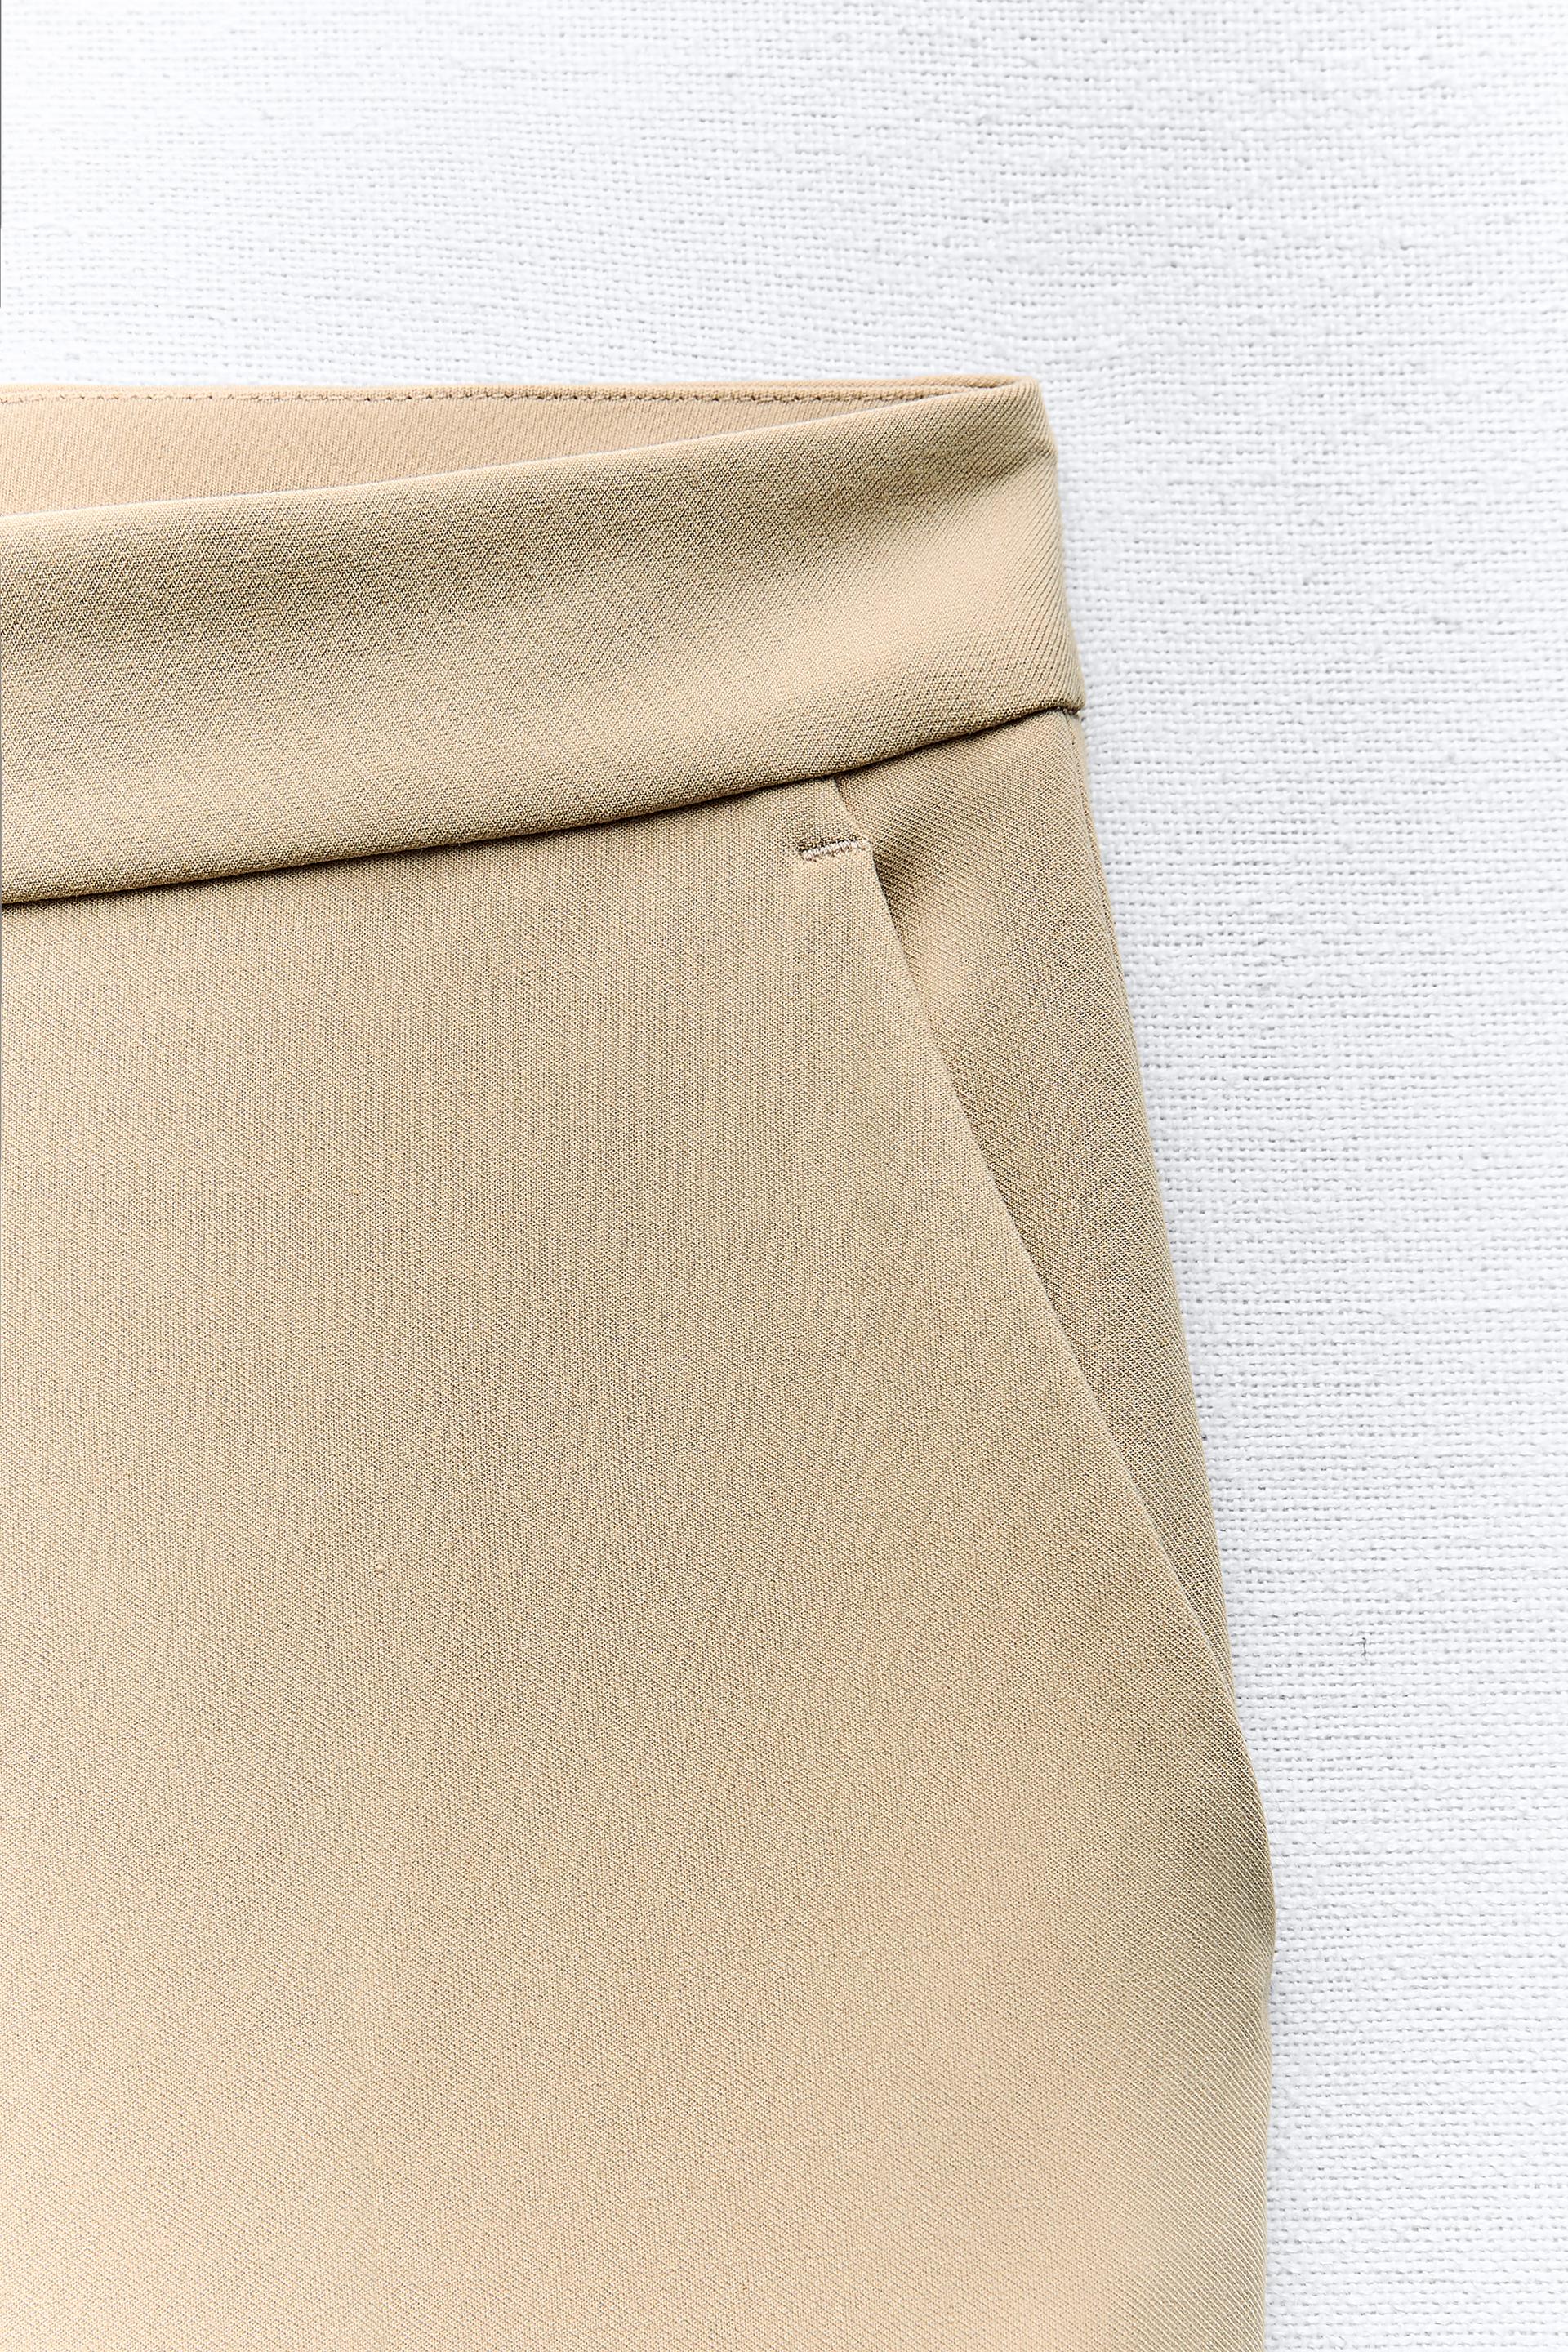 FLARED HIGH WAIST PANTS - taupe brown